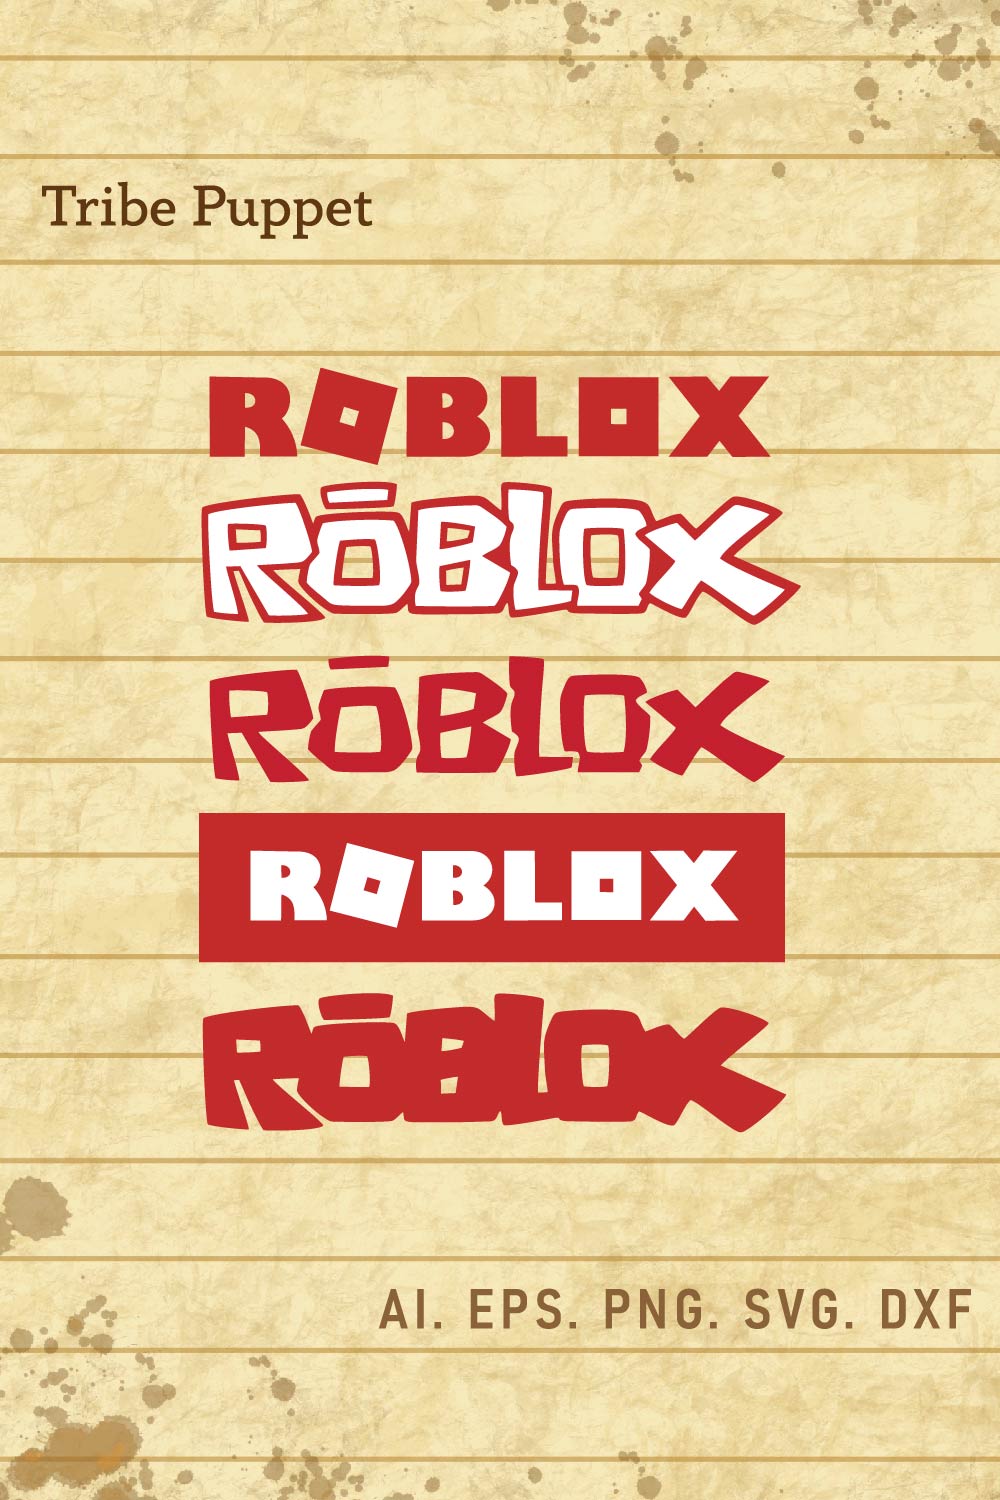 Download ROBLOX for Windows - Free - 580